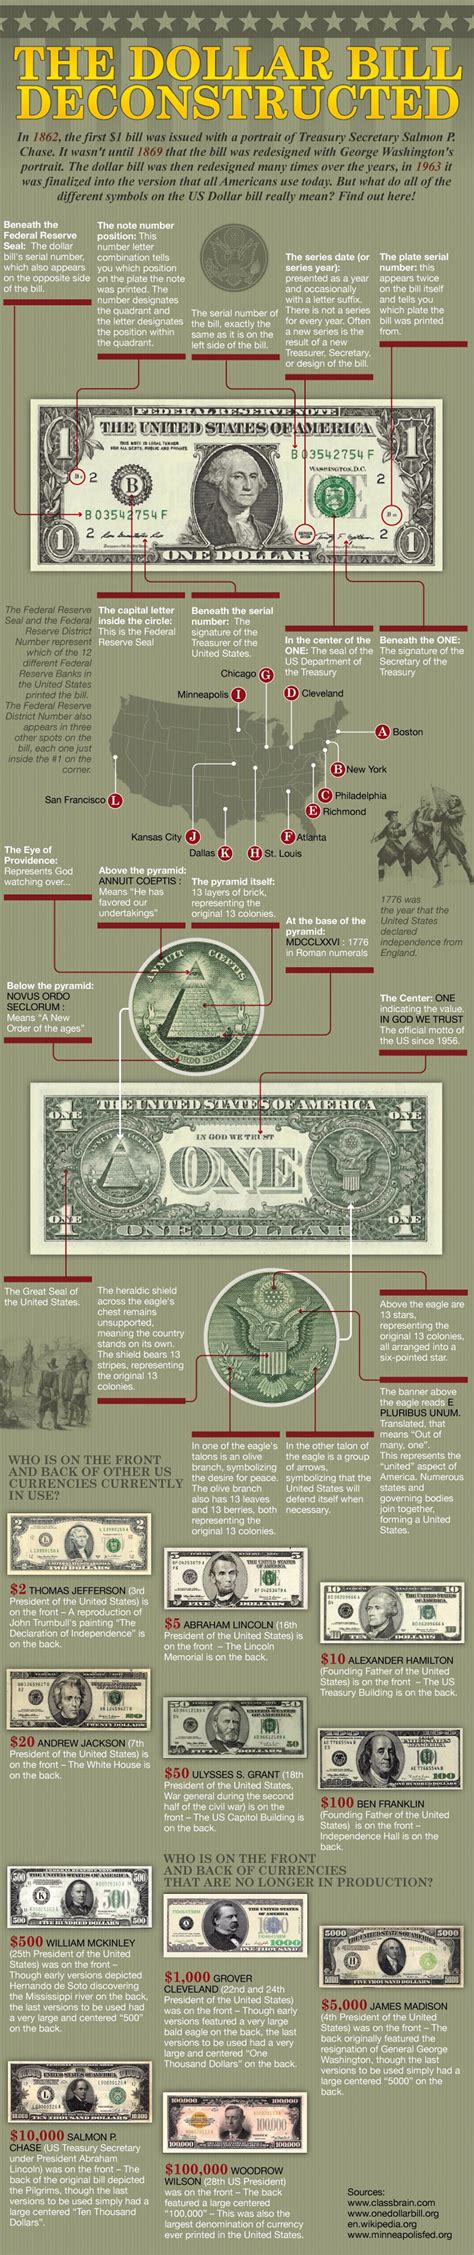 Symbols On The One Dollar Bill And What They Mean Infographic